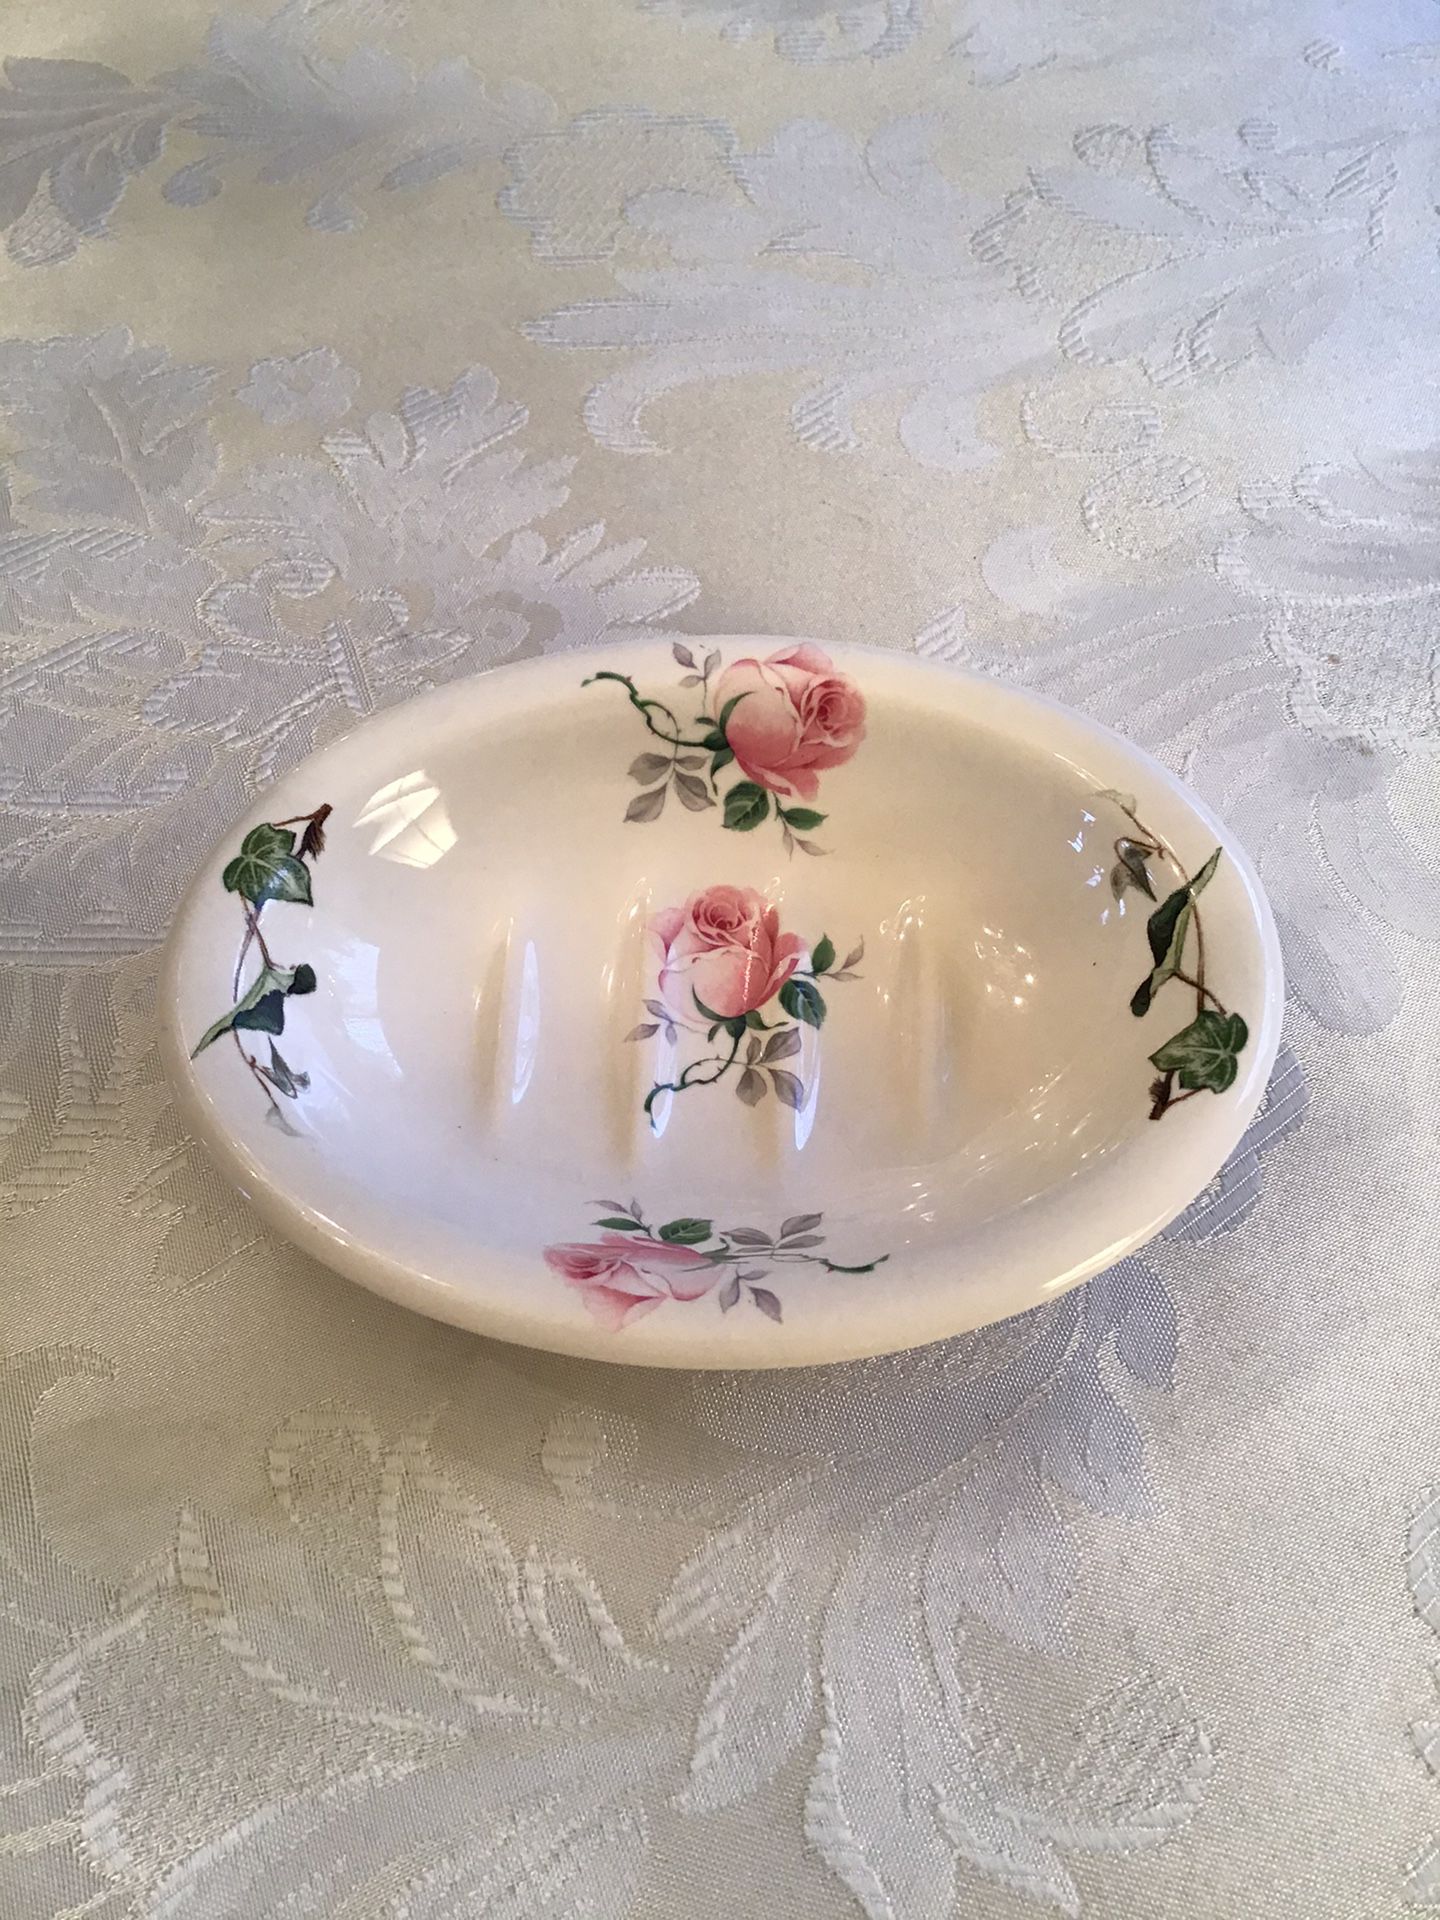 Vintage Crowne Oakes Designs Soap Dish, Made in England